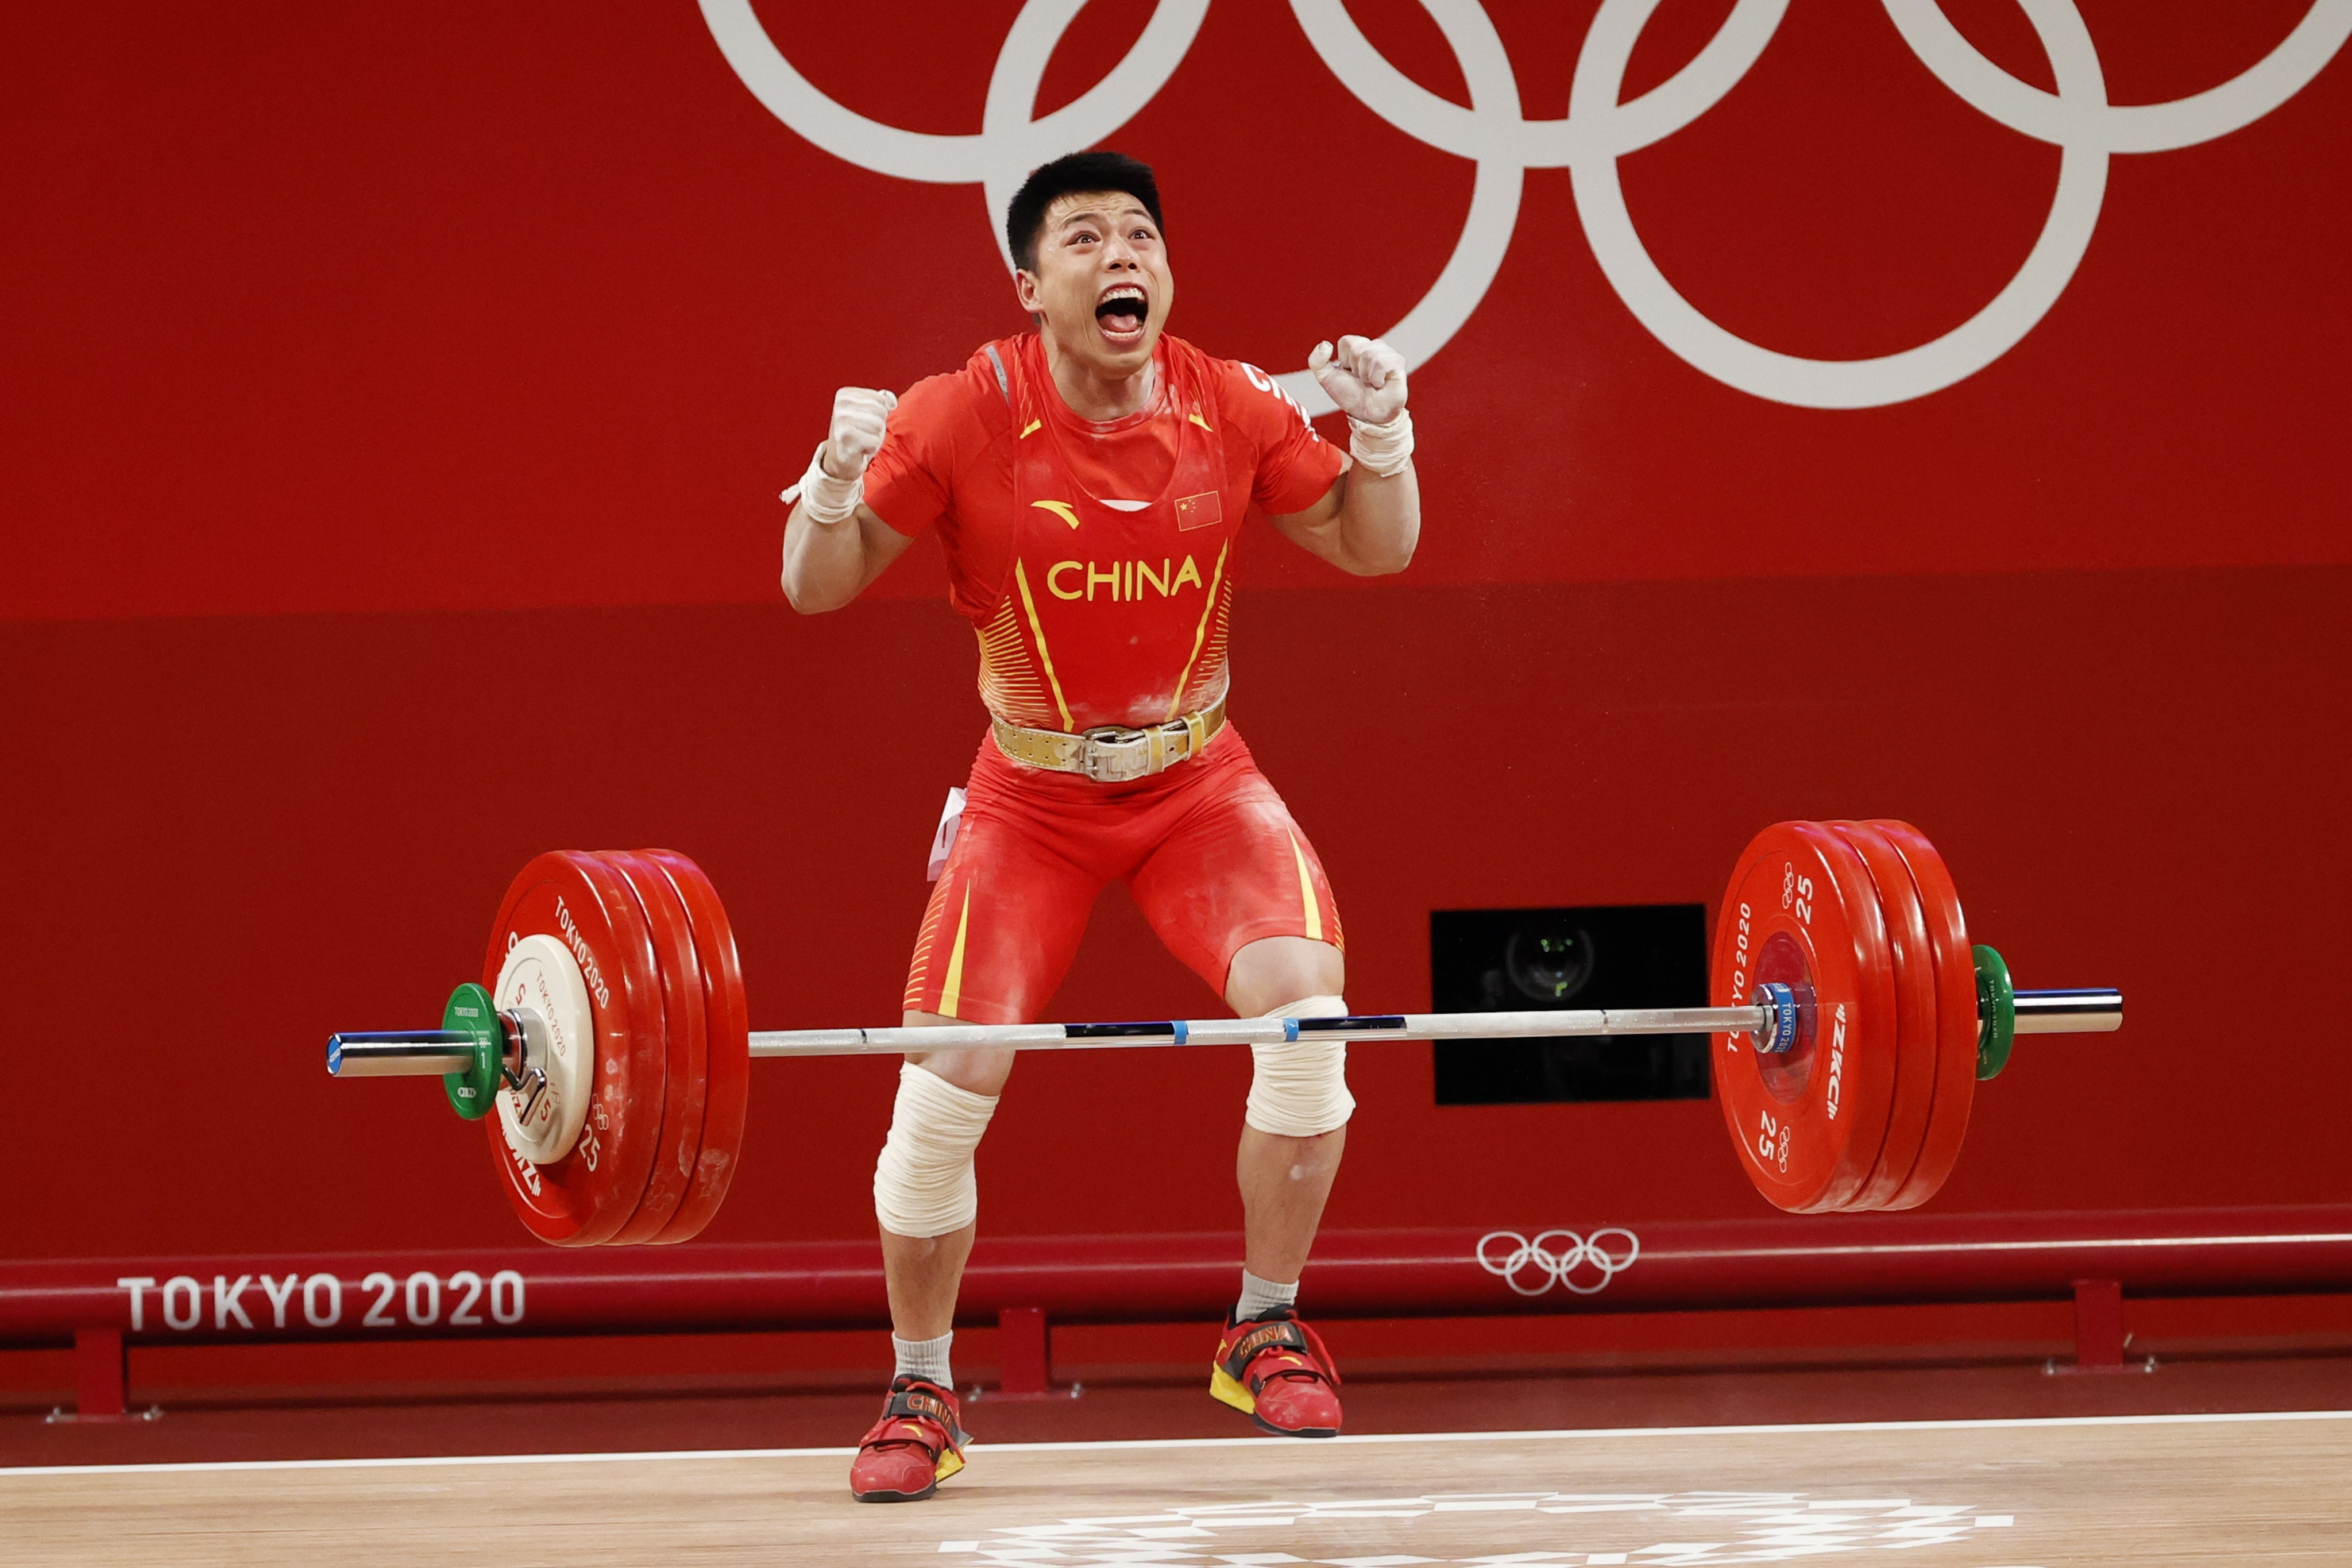 homoseksuel Ved Shipwreck China's weightlifting boss wants to launch revamp of sports image at world  championships in Chongqing | South China Morning Post